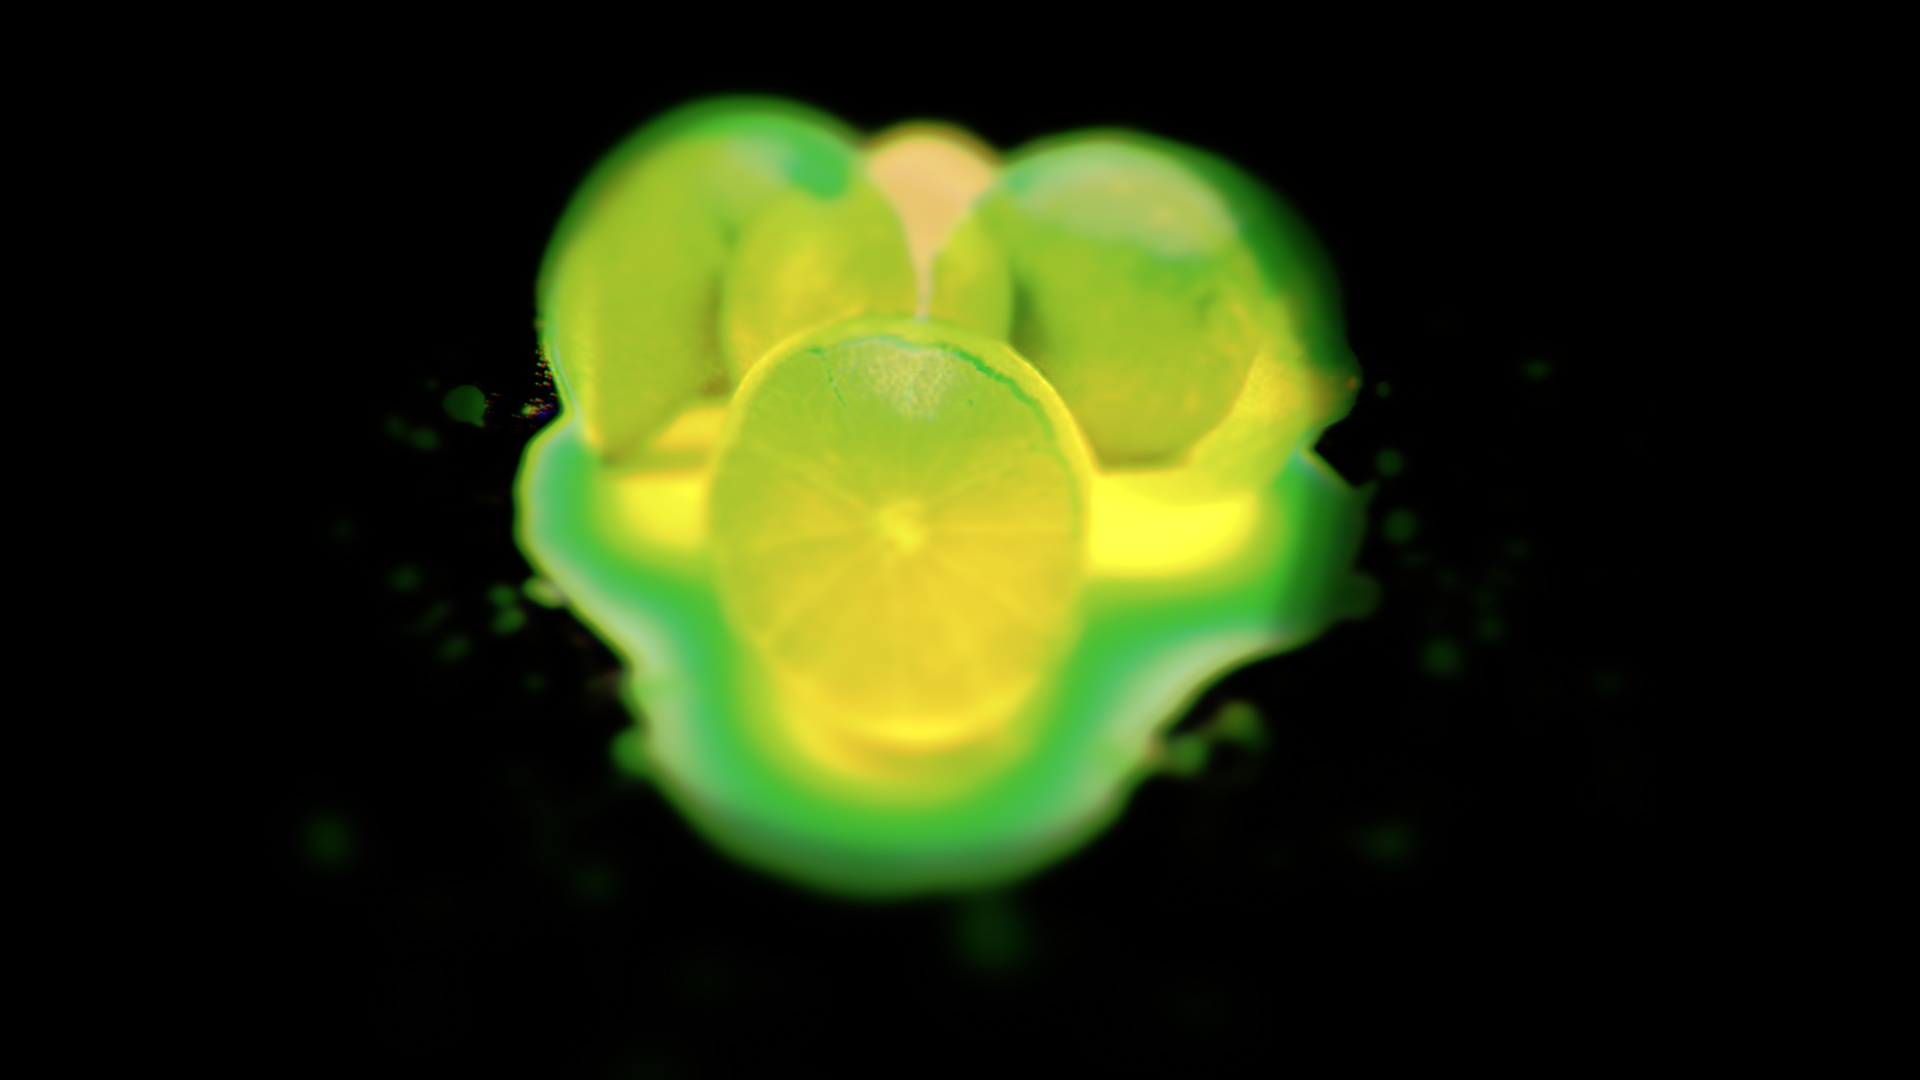 Back Pictures Web Background Lemon Green Professional - Macro Photography - HD Wallpaper 